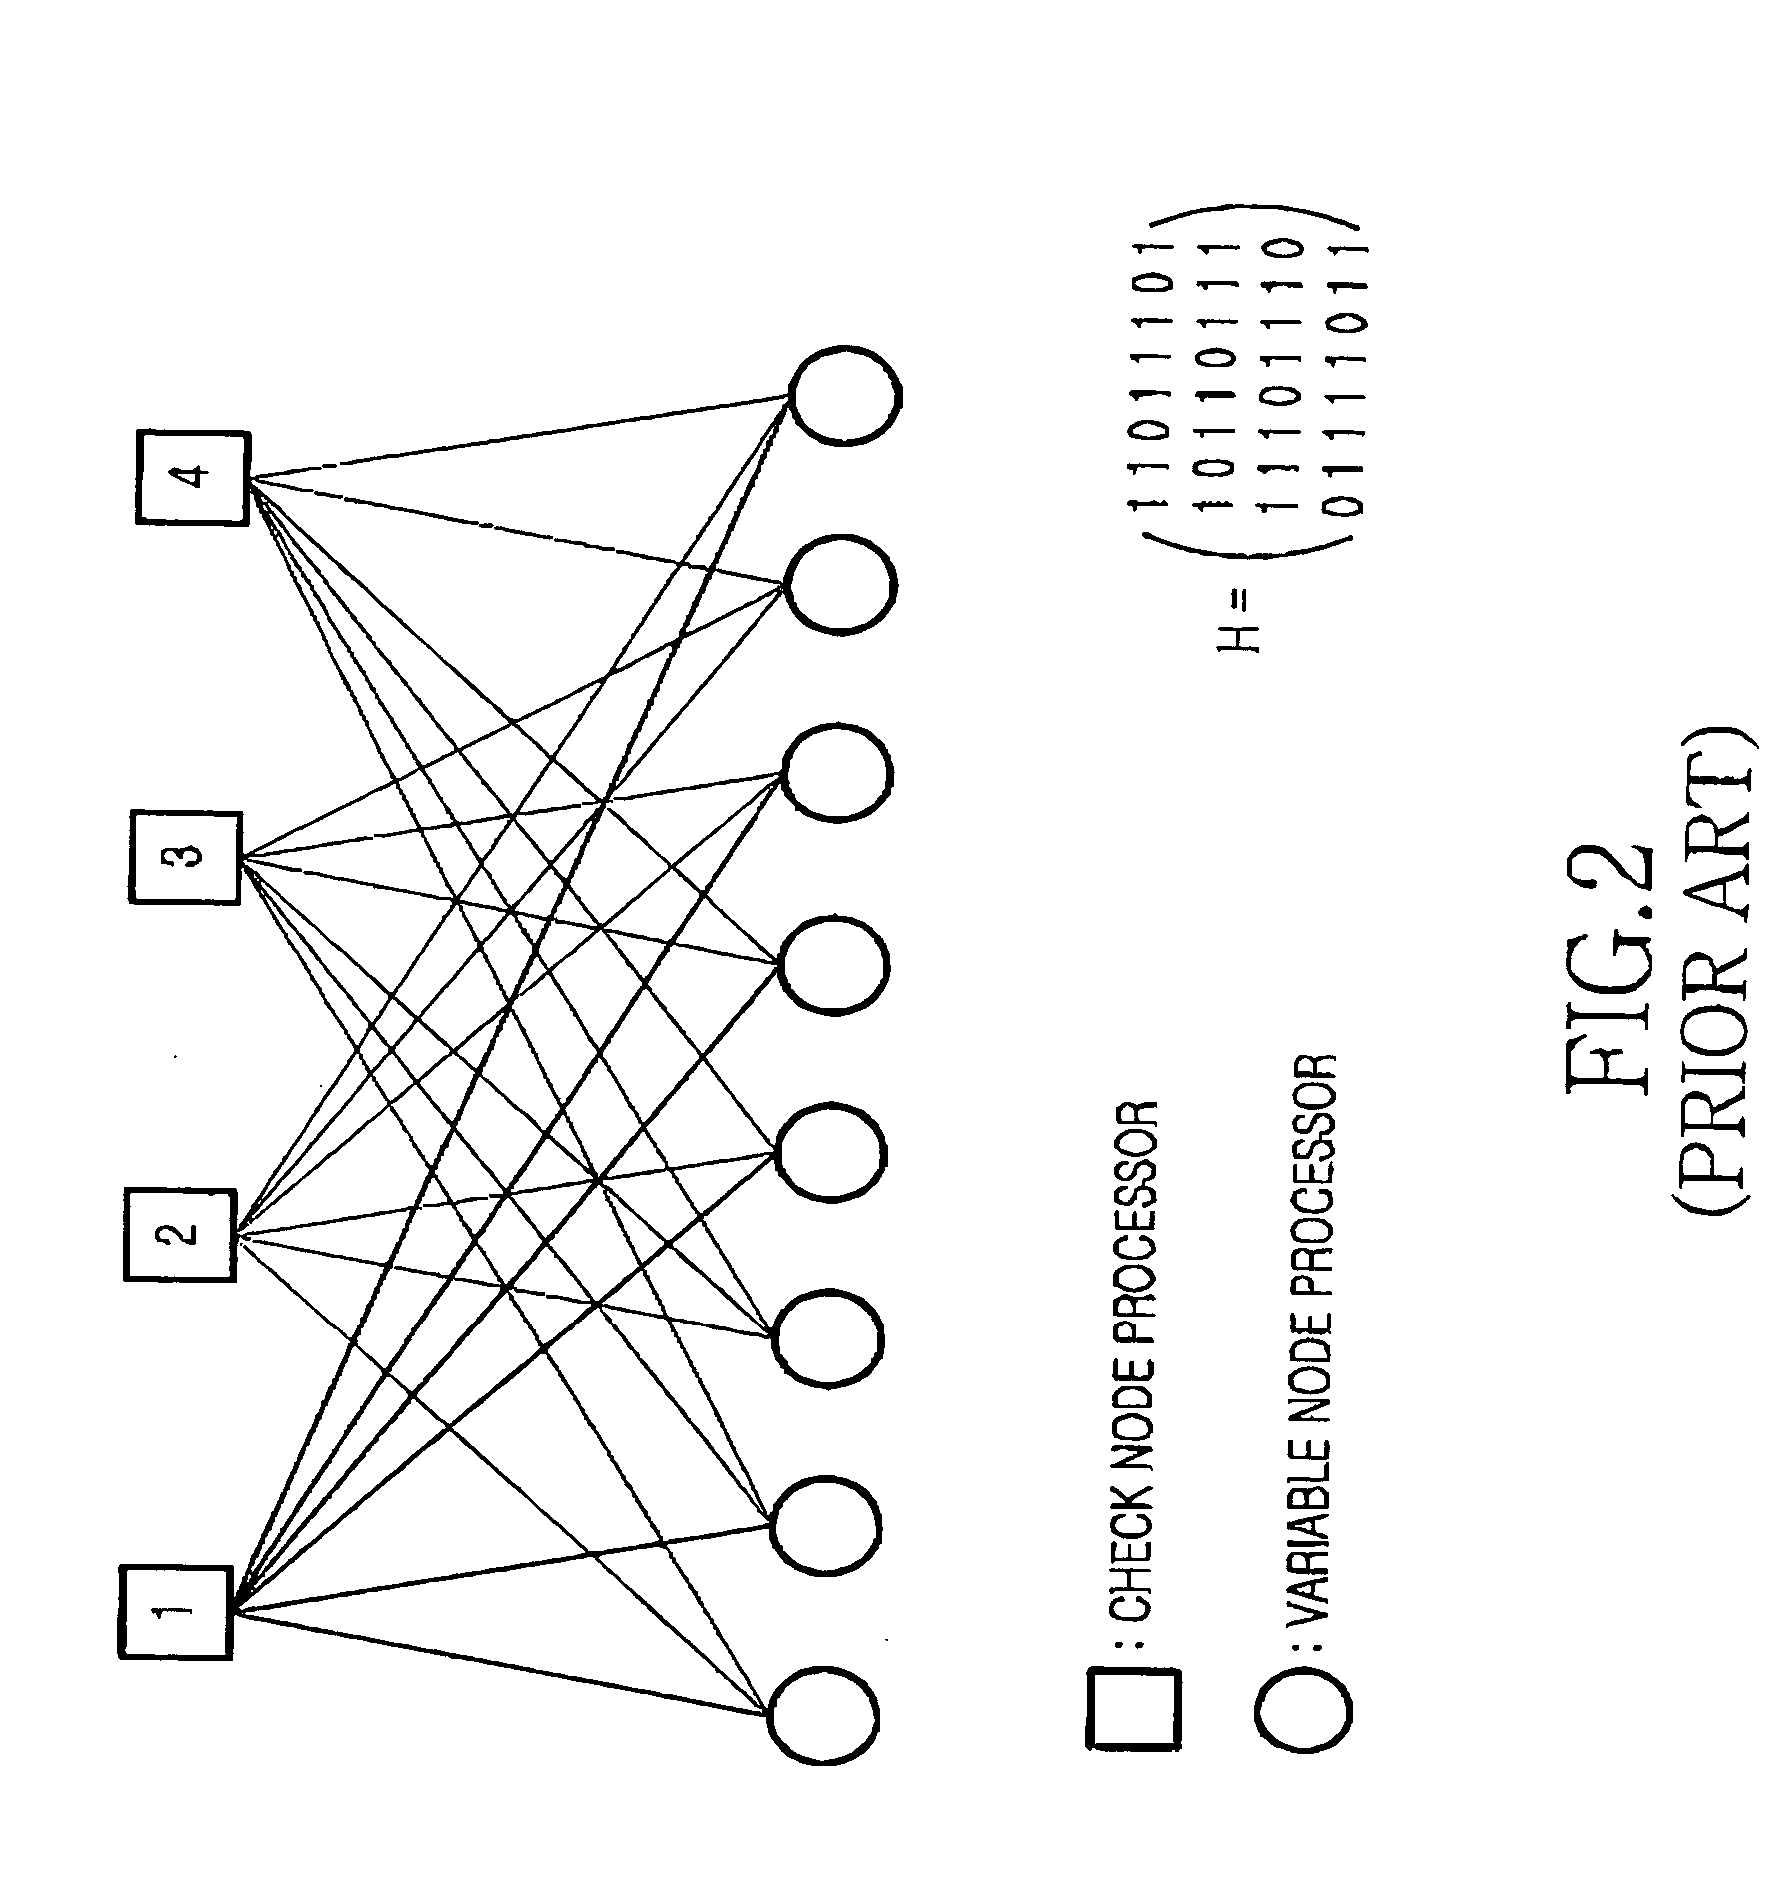 Apparatus and method for decoding low density parity check codes